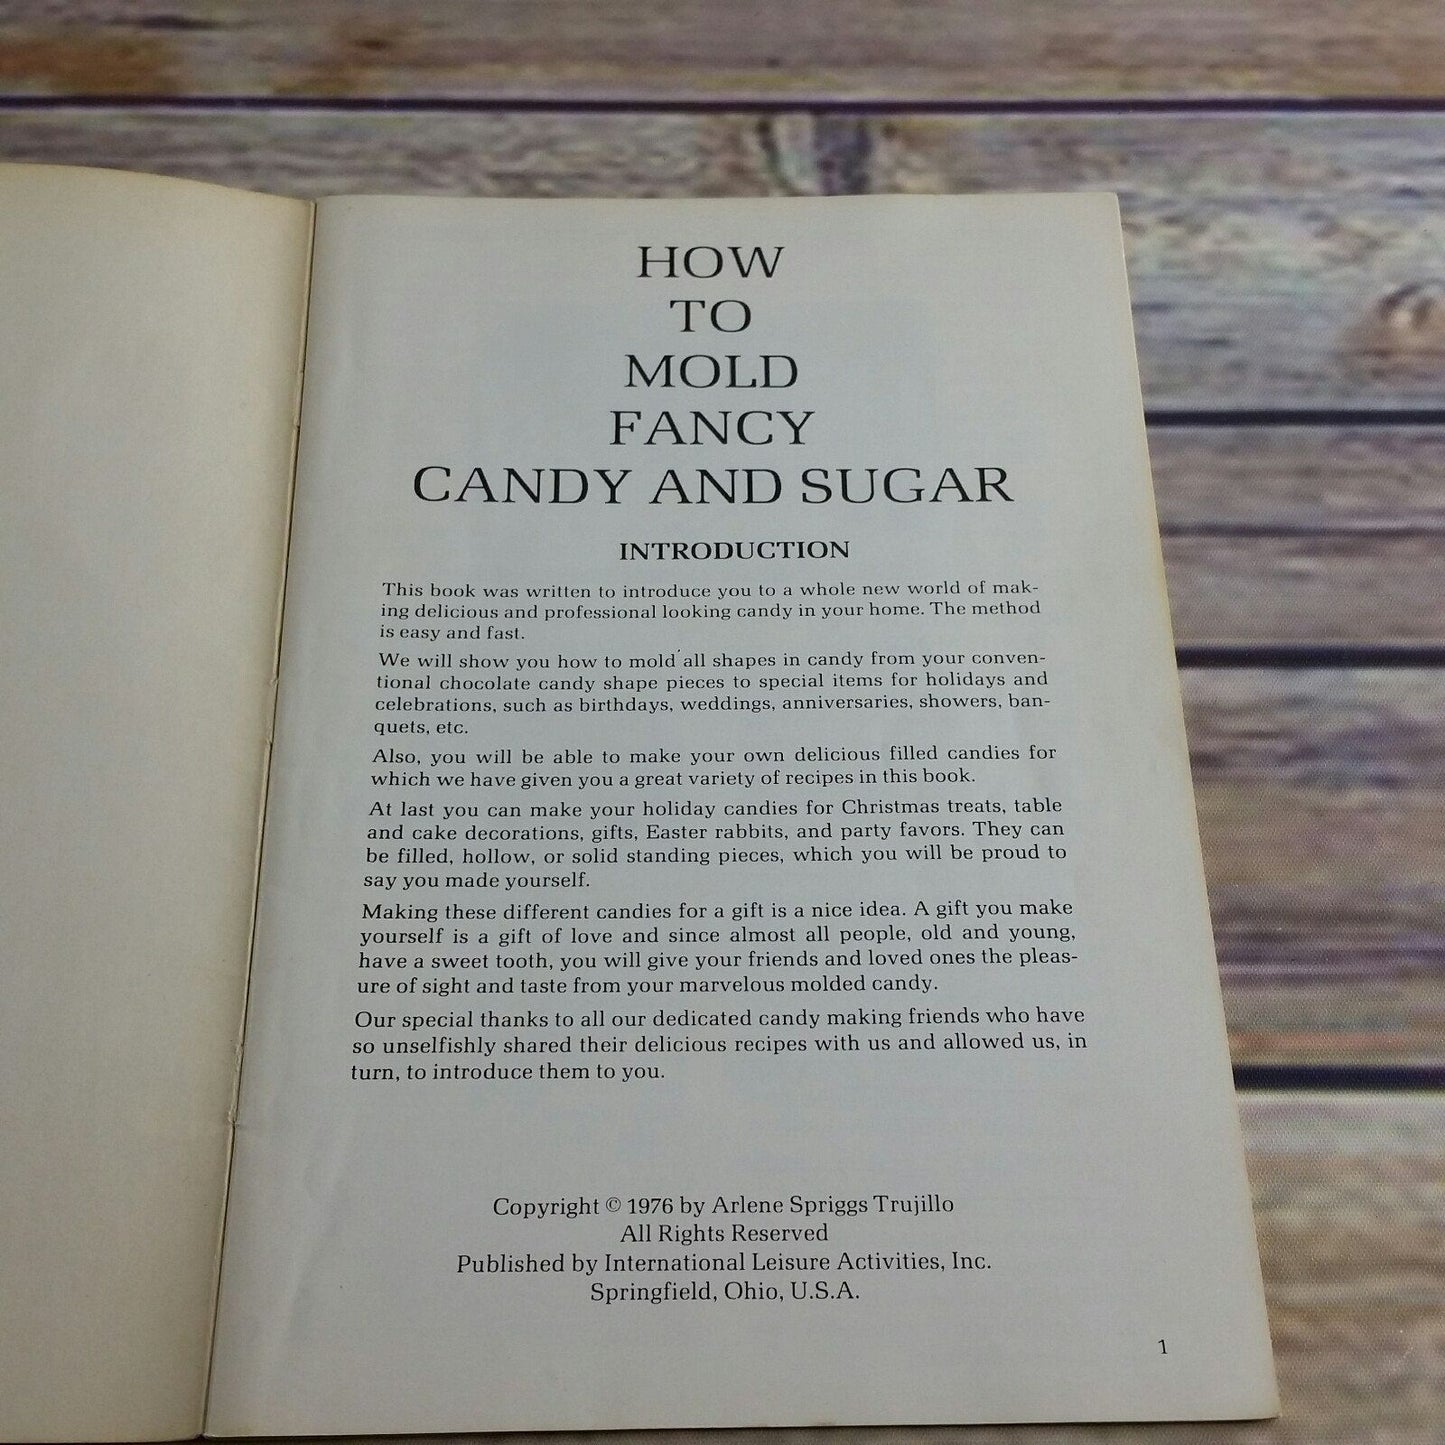 Vintage Cookbook How to Mold Fancy Candy and Sugar Candy Recipes 1976 Arlene Trujillo Paperback Booklet